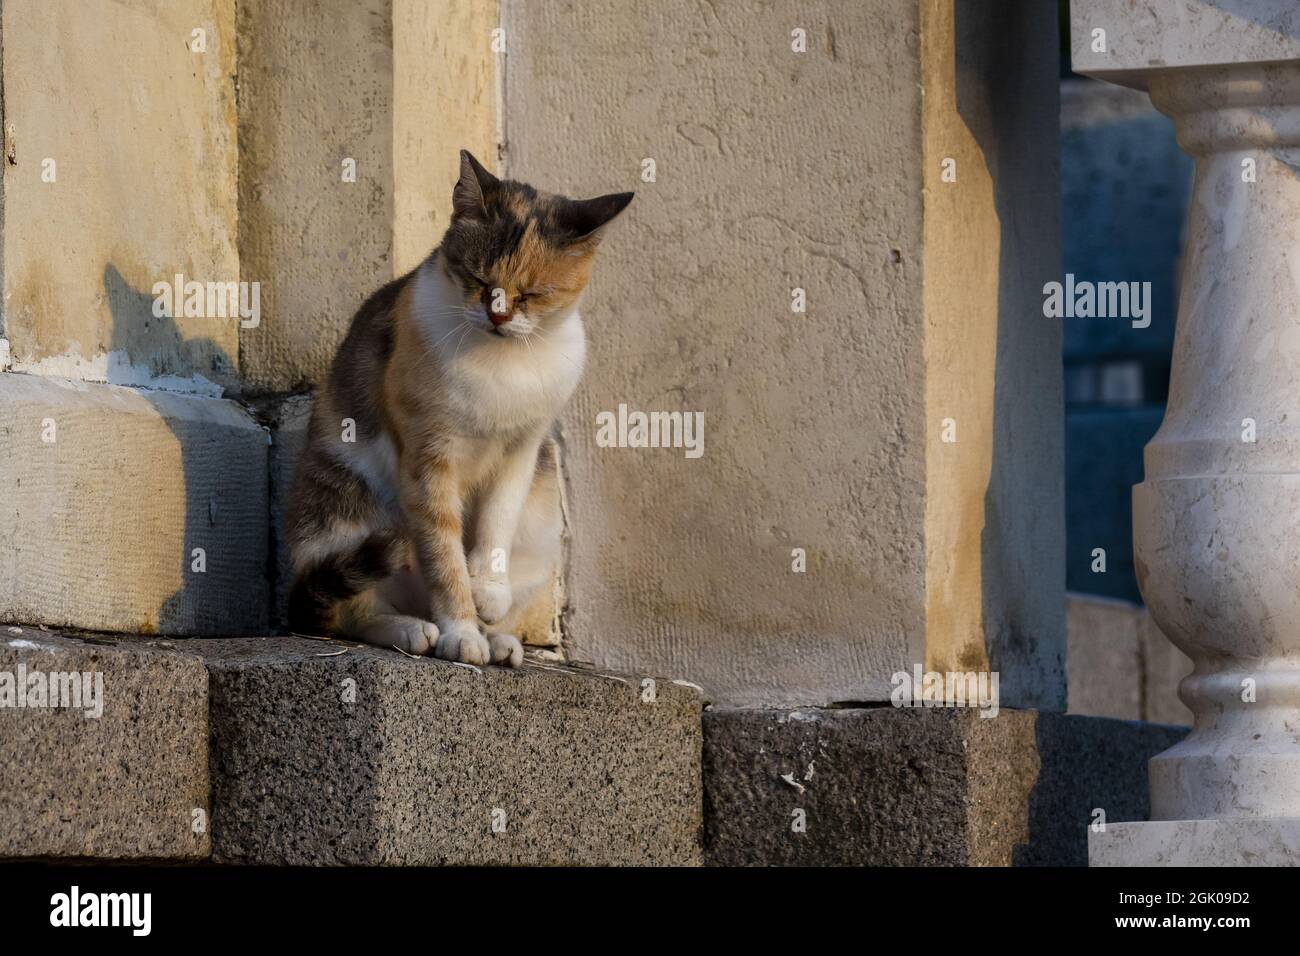 A closeup of a small furry multi-color cat sitting in the corner of walls Stock Photo